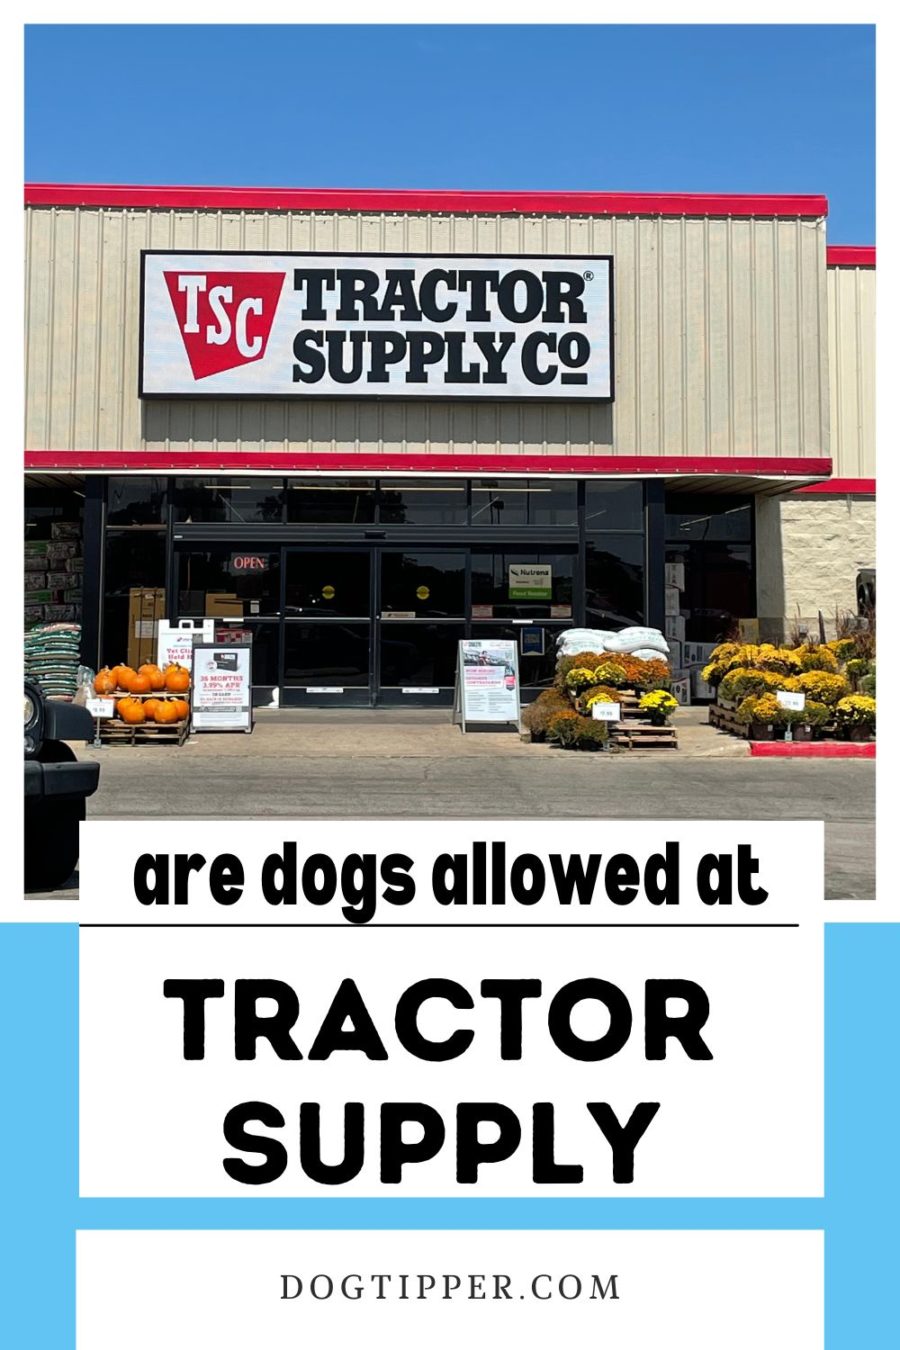 Is Tractor Supply Dog Friendly?